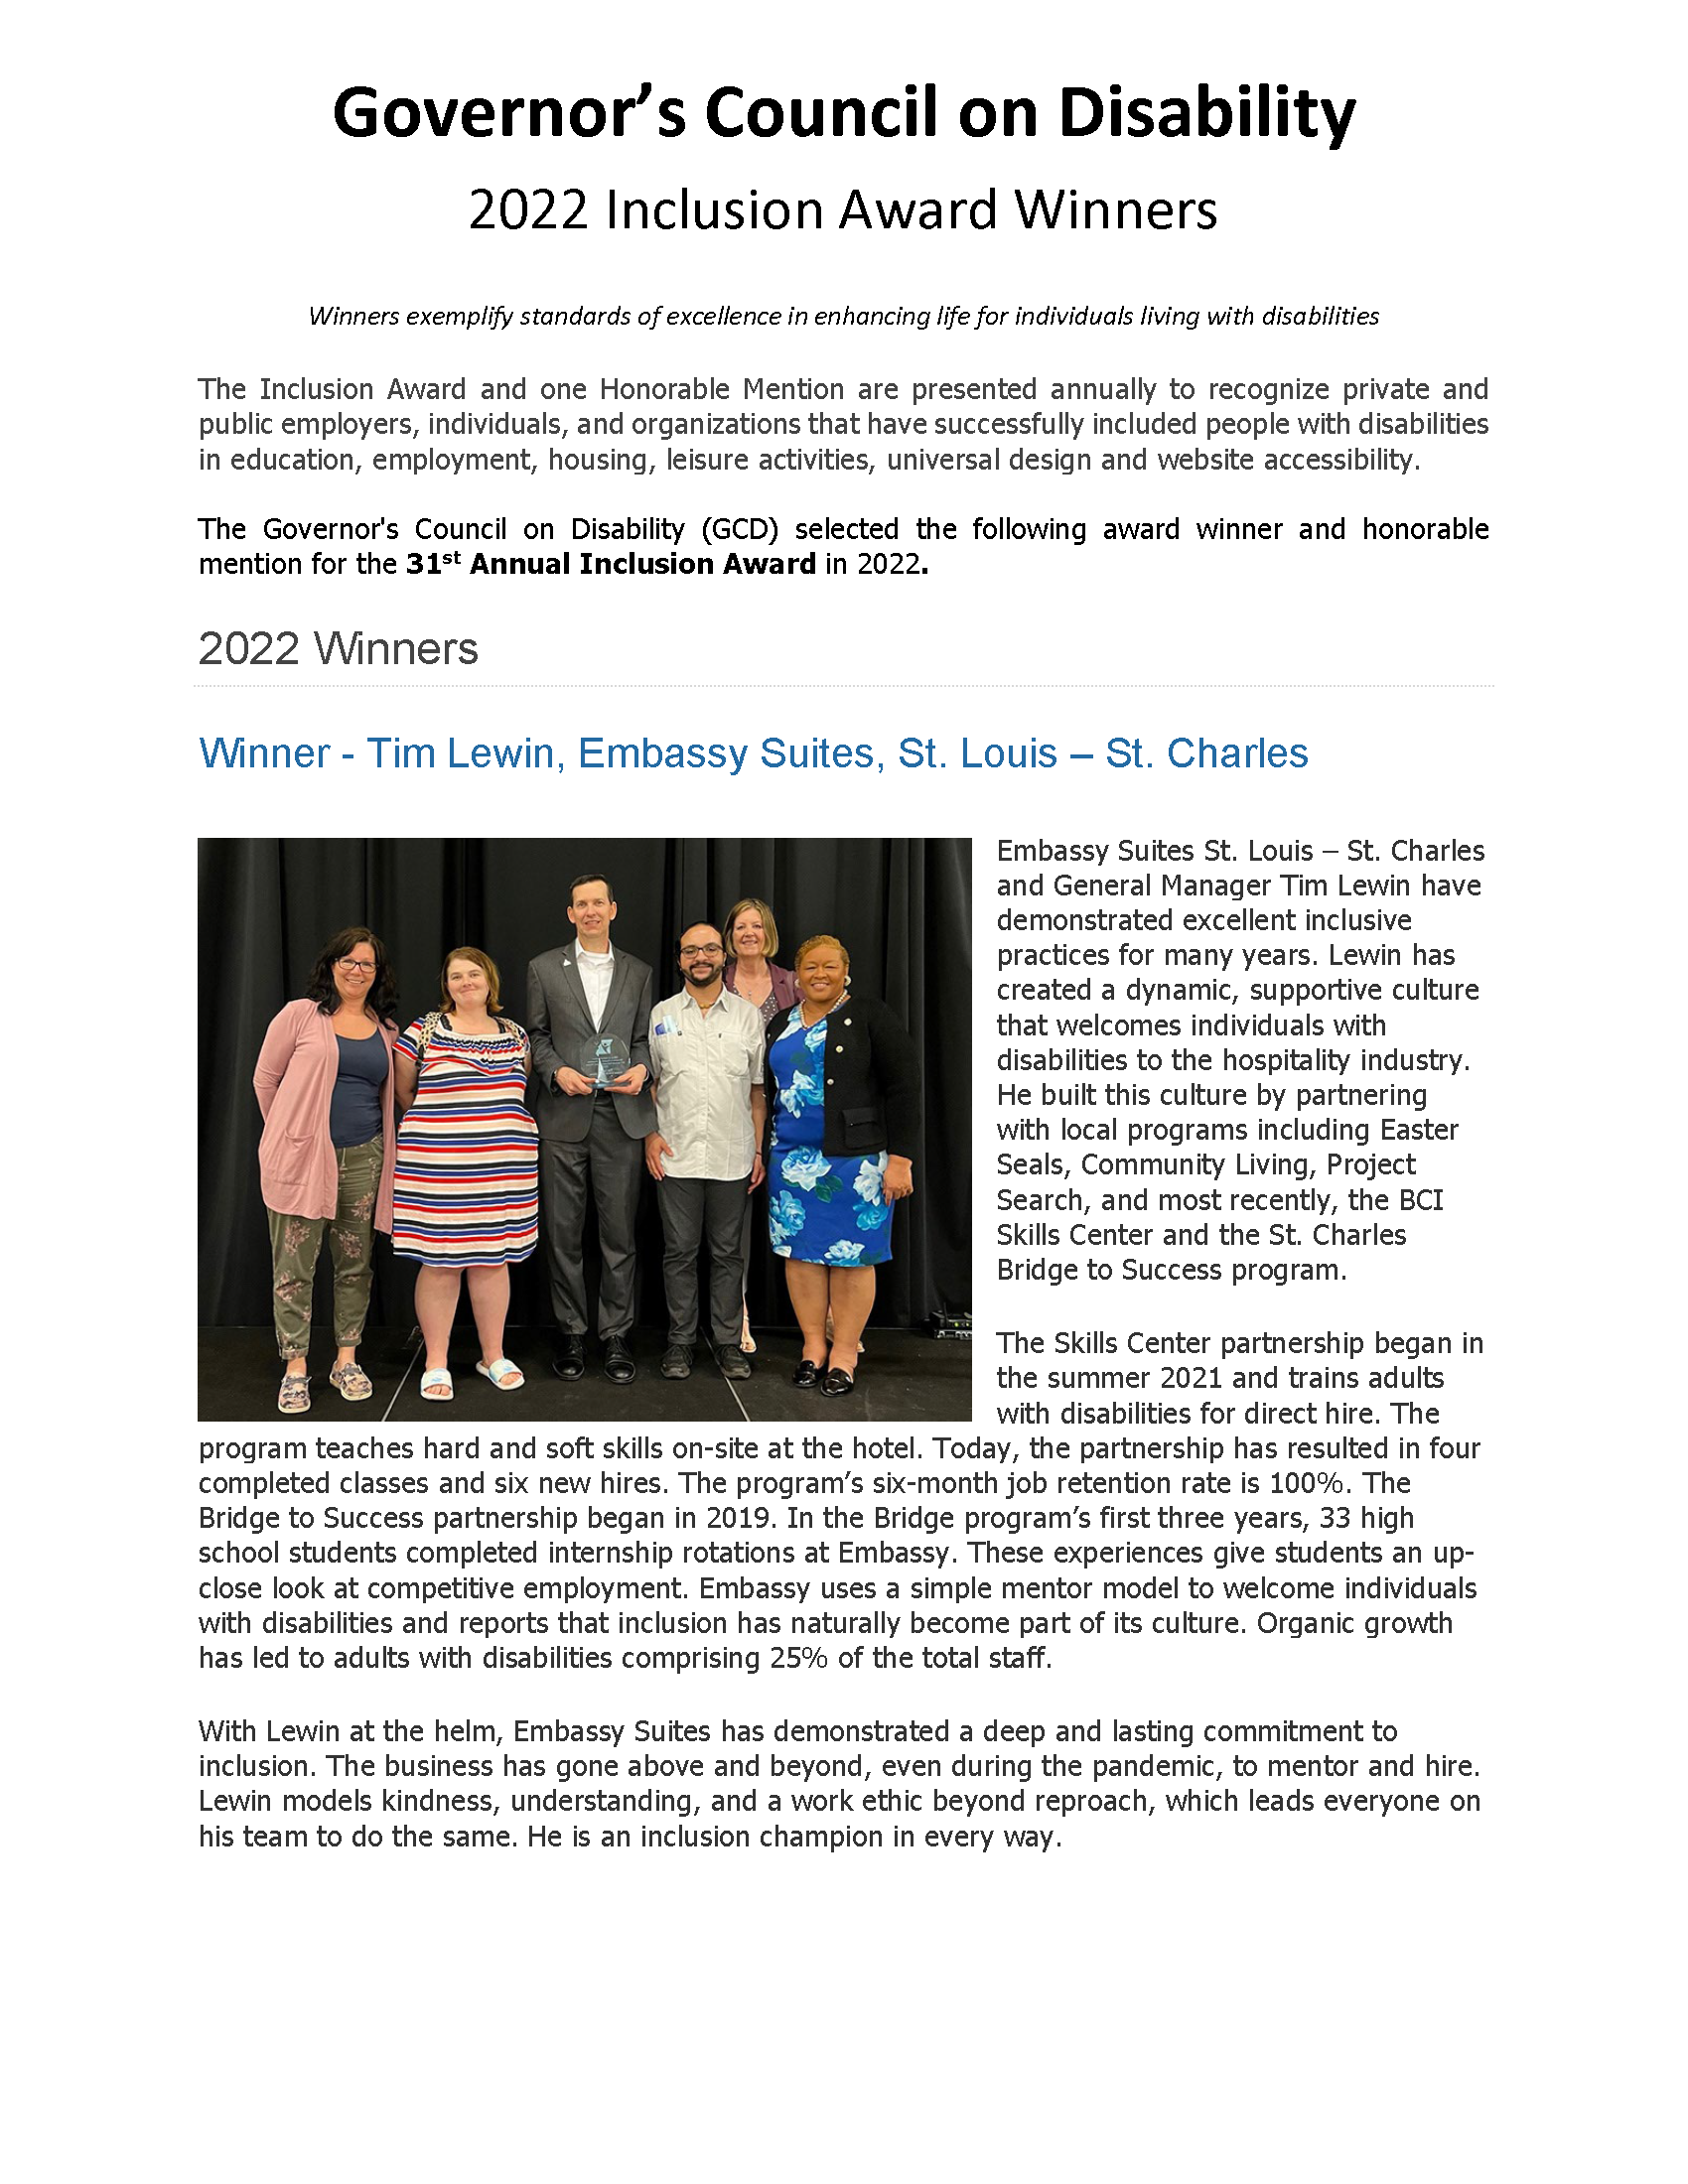 2022 Winners of Governers Council on Disability Annual Inclusion Award